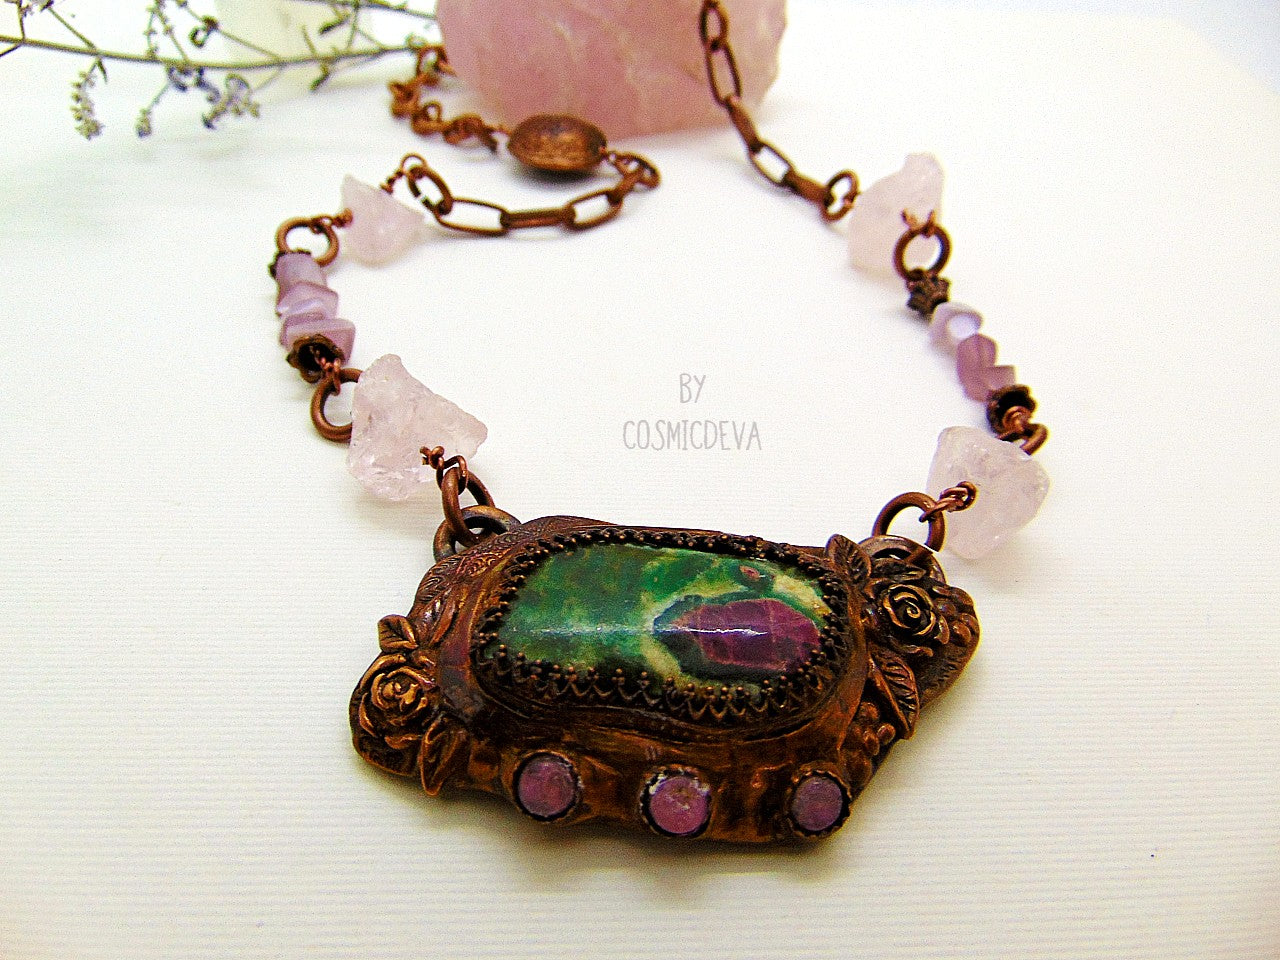 One of a kind handmade necklace with a hand sculptured solid copper pendant featuring a beautiful ruby in fuchsite gemstone cabochon in a bezel setting, surrounded with roses and natural raw pink tourmaline gemstones. This ruby in fuchsite statement necklace pendant suspends from a copper chain with accentual raw rose quartz crystal gemstones and handcrafted copper lentil beads.